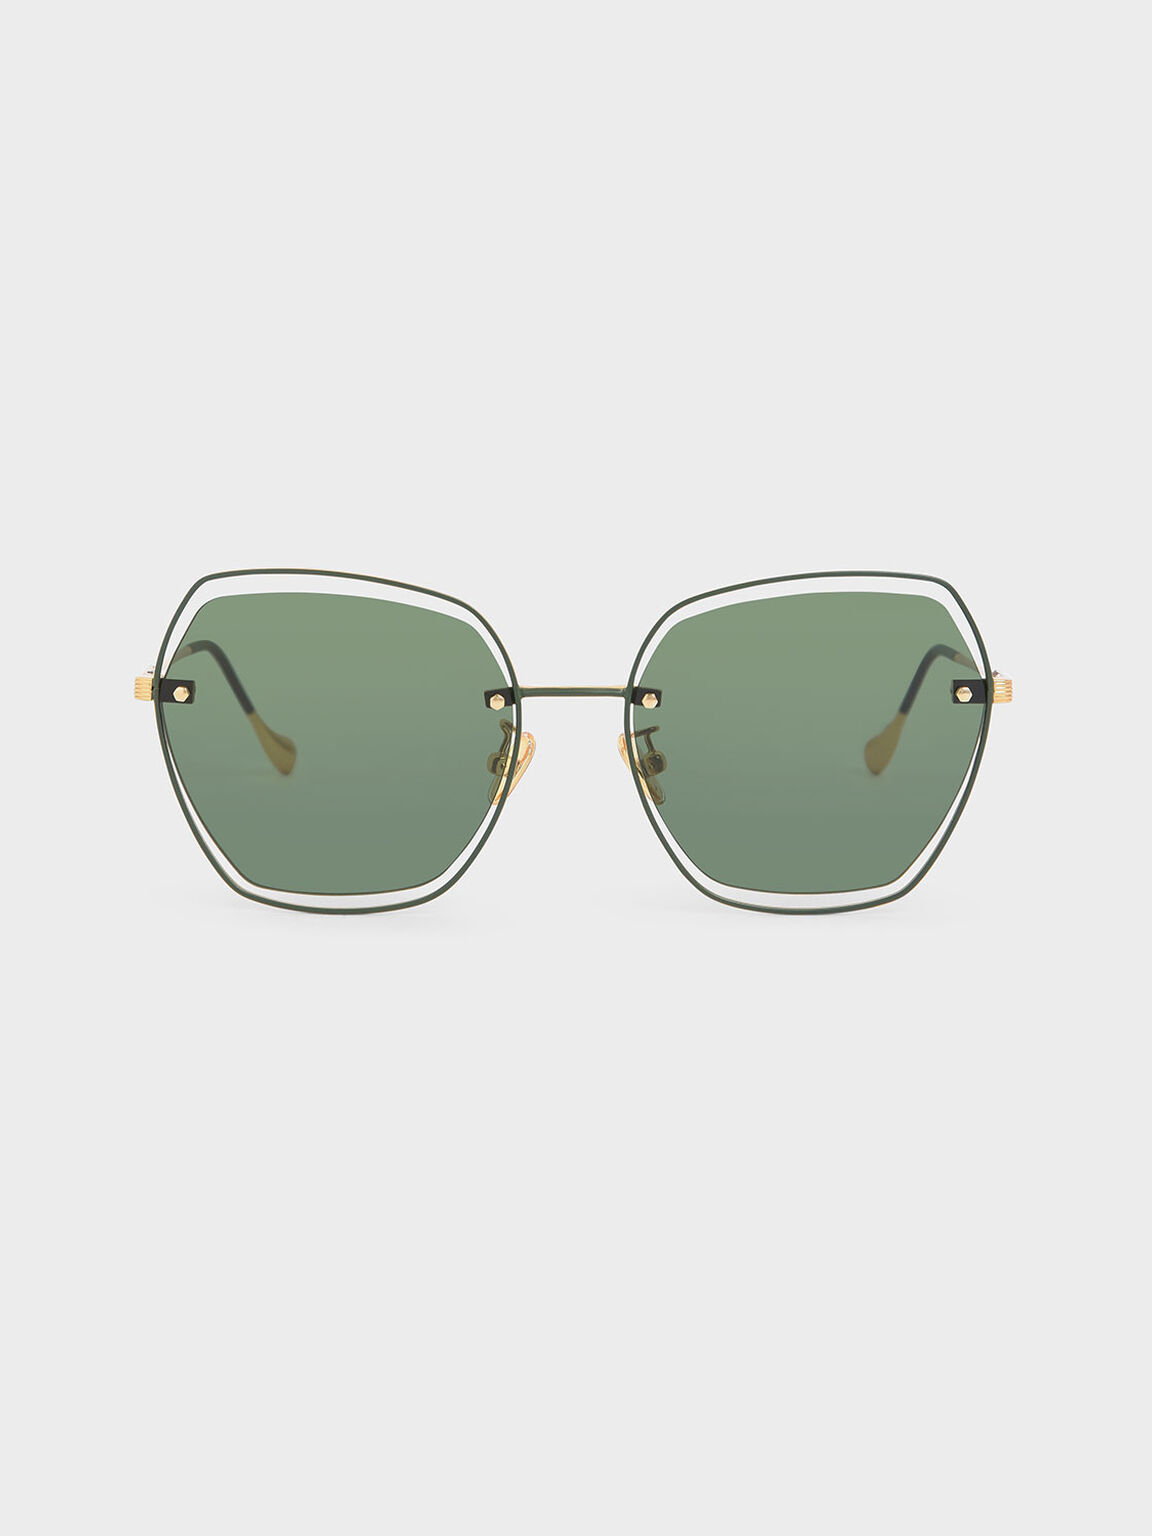 Double Wire Frame Butterfly Sunglasses, Green, hi-res